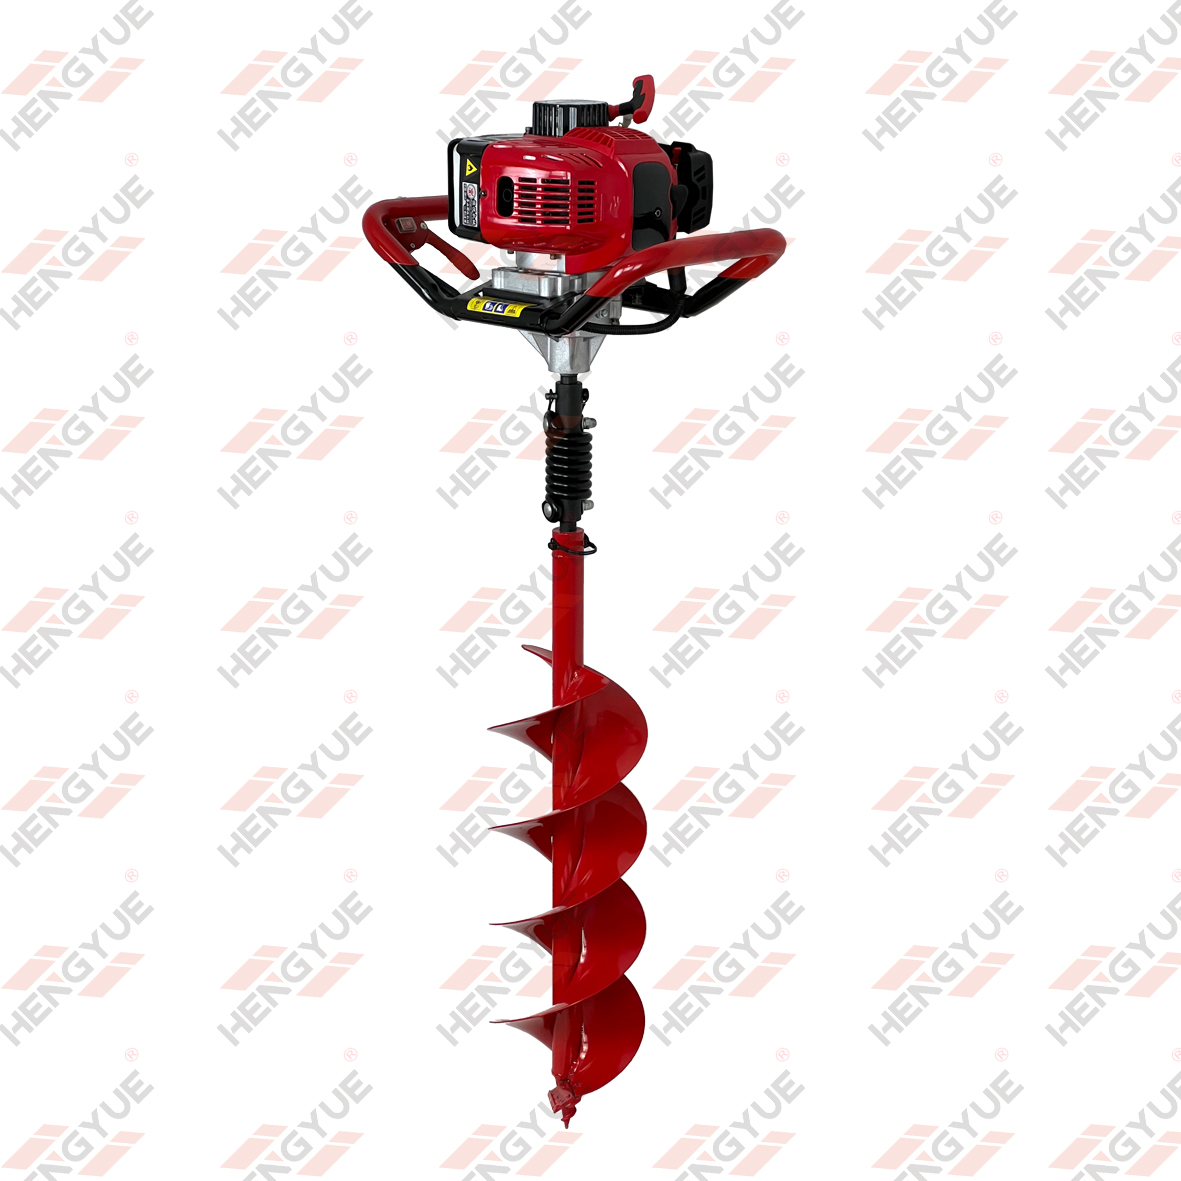 58CC 2 Stroke Hand Held Earth Auger Drilling Machine